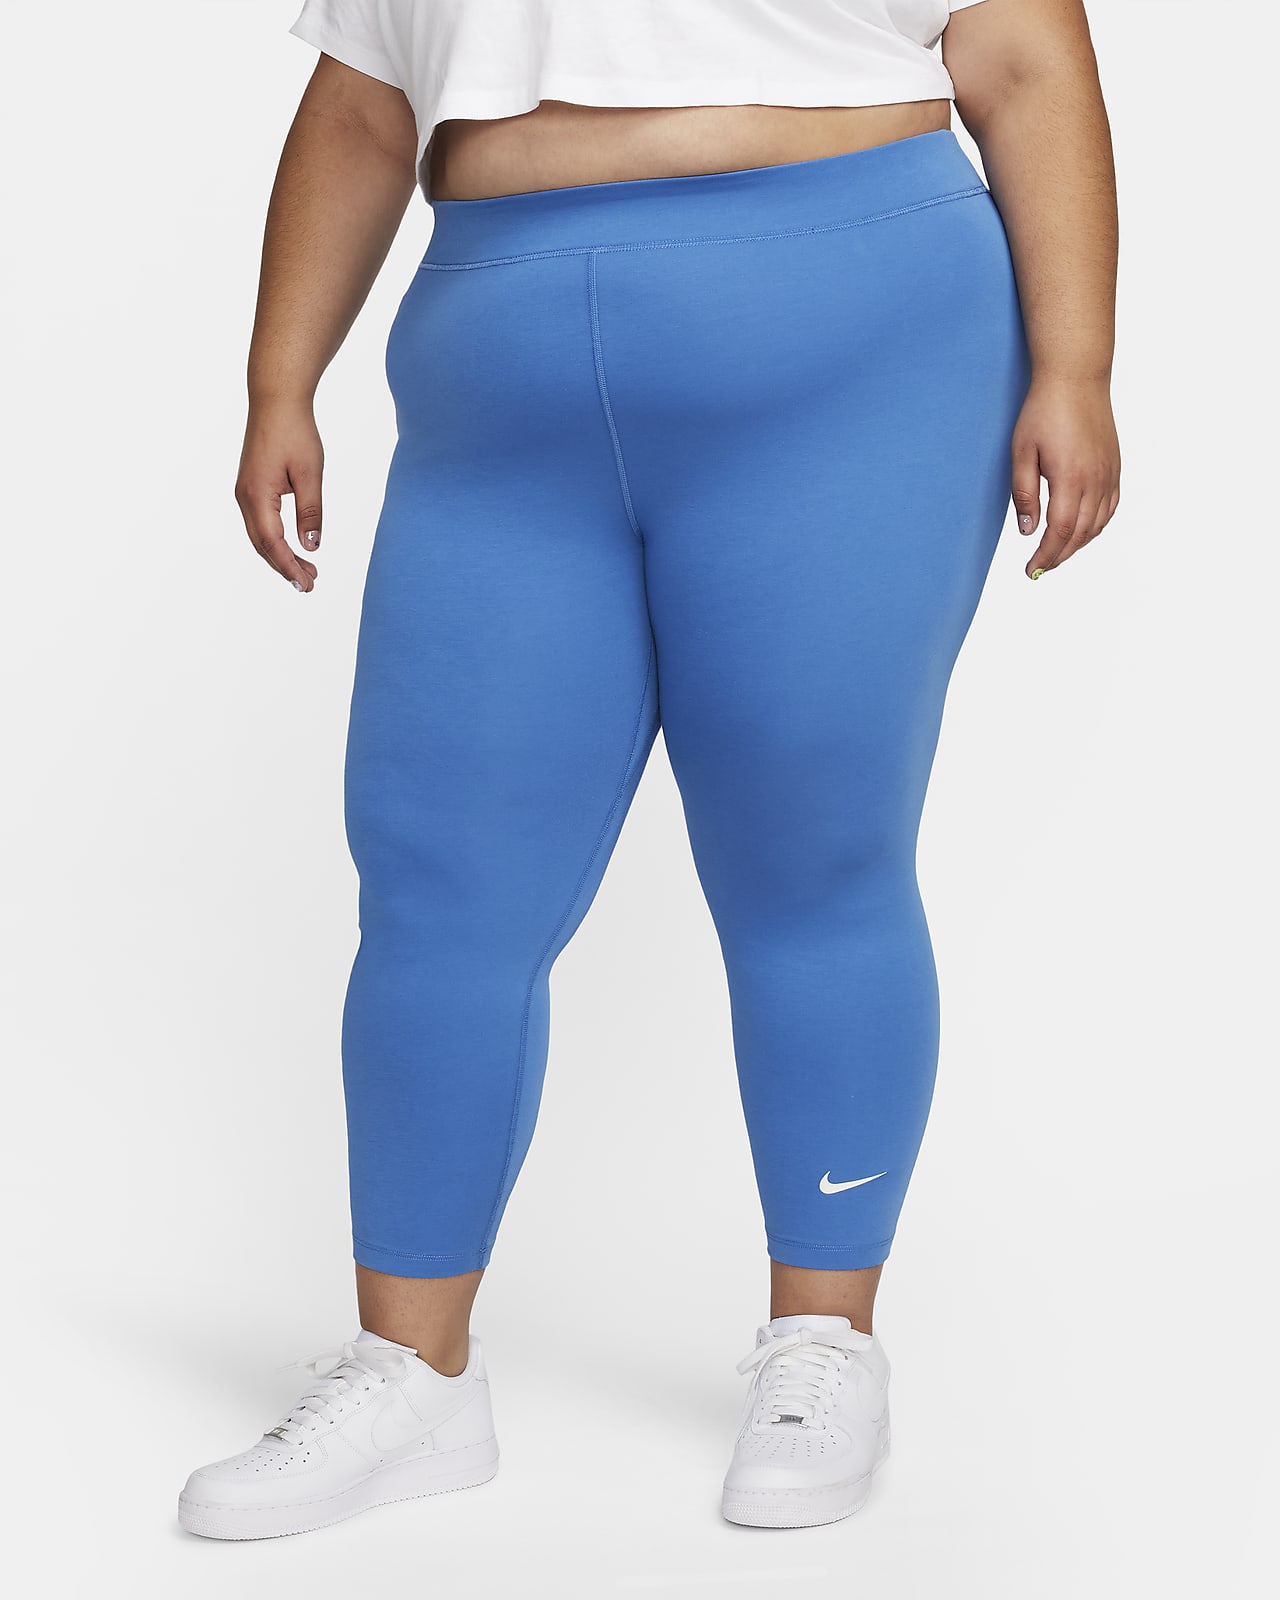 https://static.nike.com/a/images/t_PDP_1280_v1/f_auto,q_auto:eco/2730d3c4-38ba-40a5-9402-043bfbac8ad3/sportswear-classic-womens-high-waisted-7-8-leggings-plus-size-t9Qx6H.png